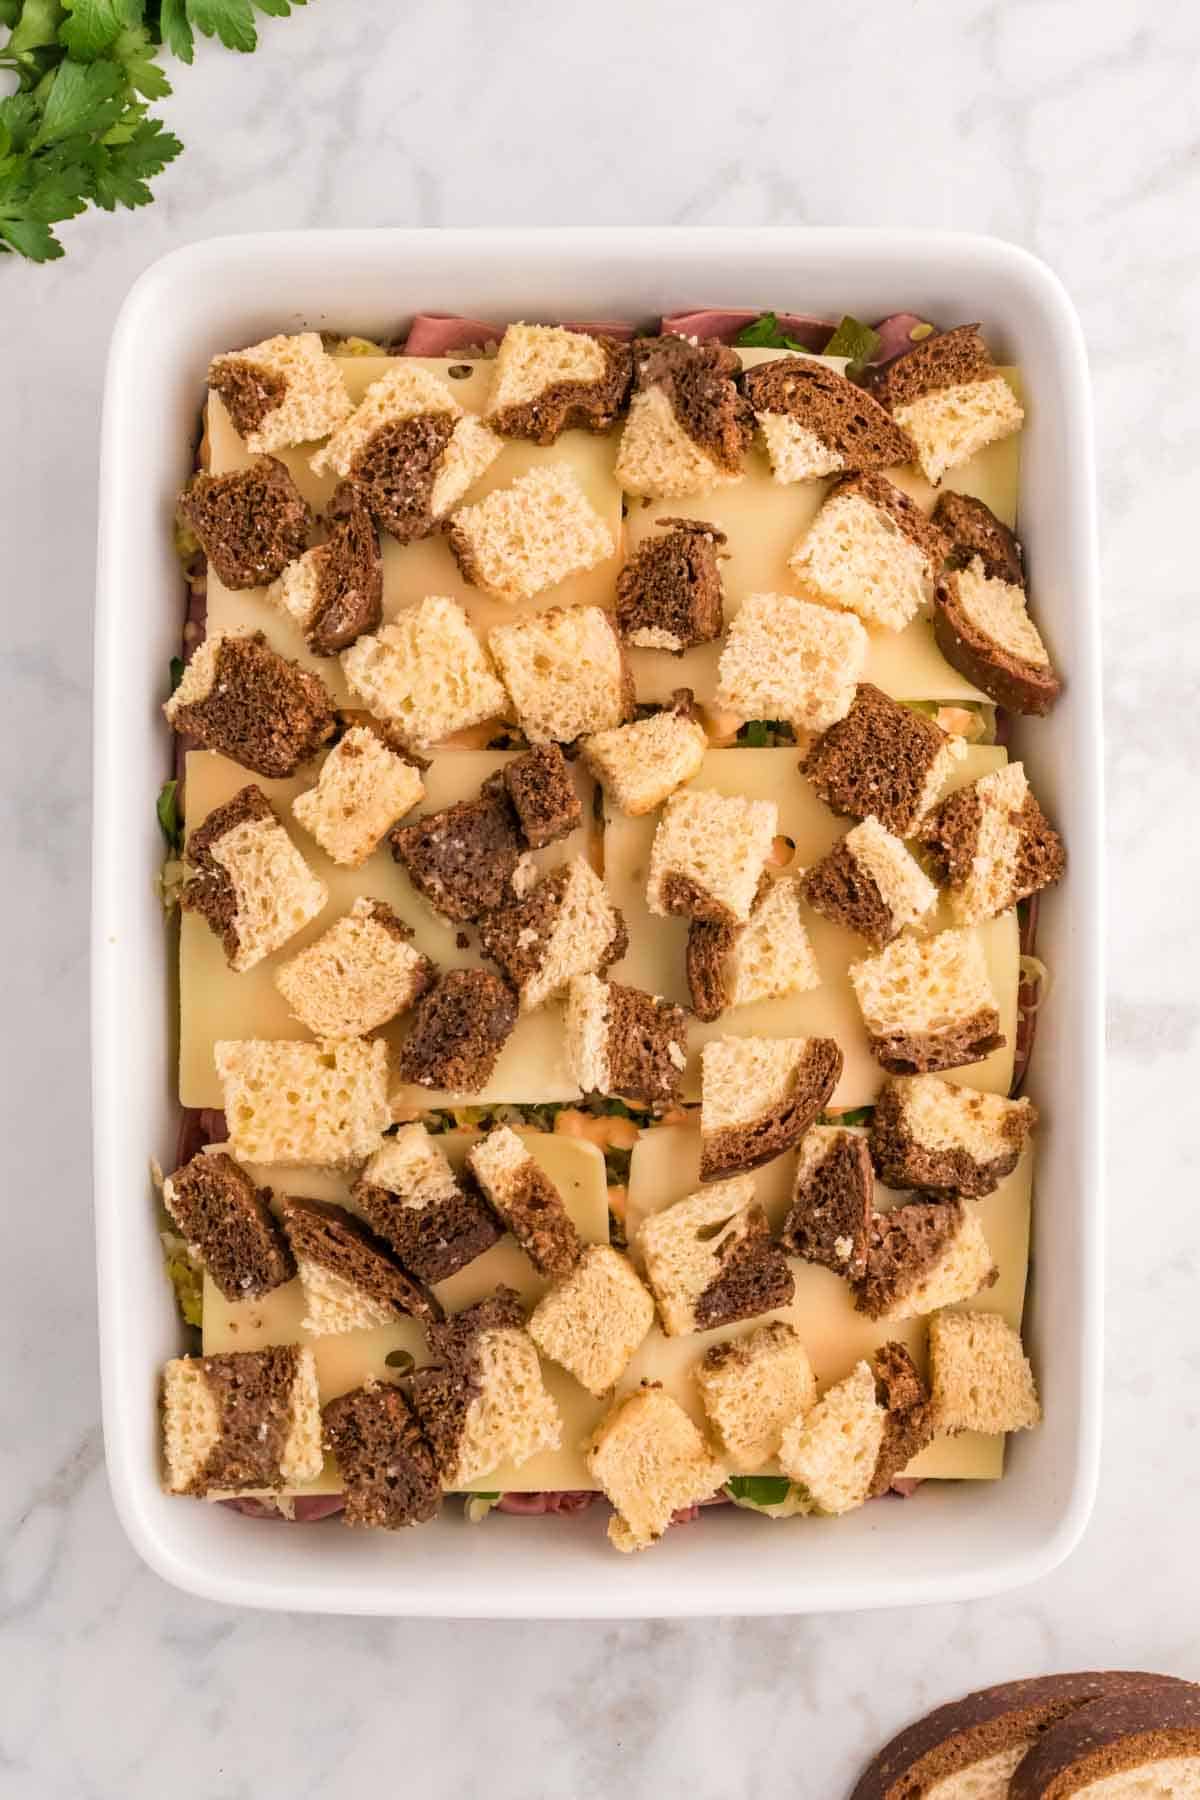 cubes of marble rye bread on top of Swiss cheese in a casserole dish